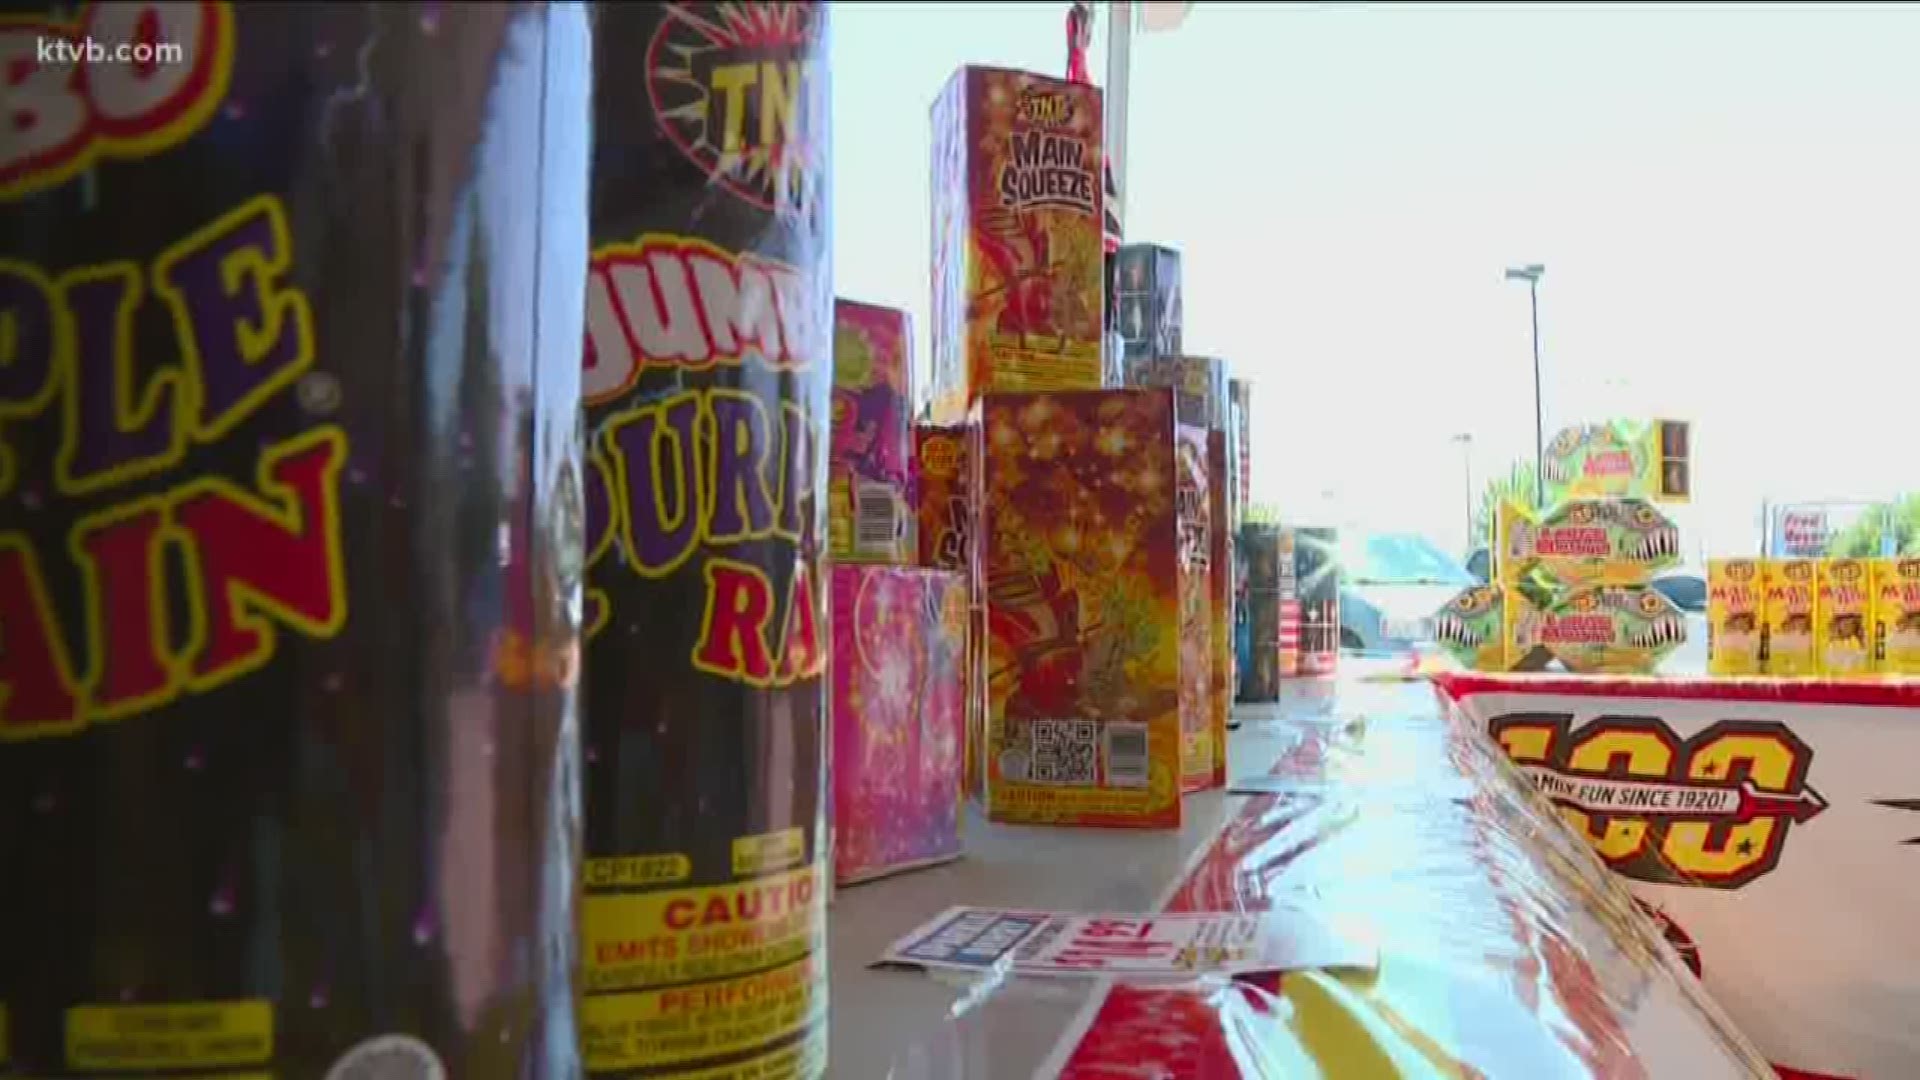 Many people are heading to local fireworks stands this Fourth of July. Sales are booming.